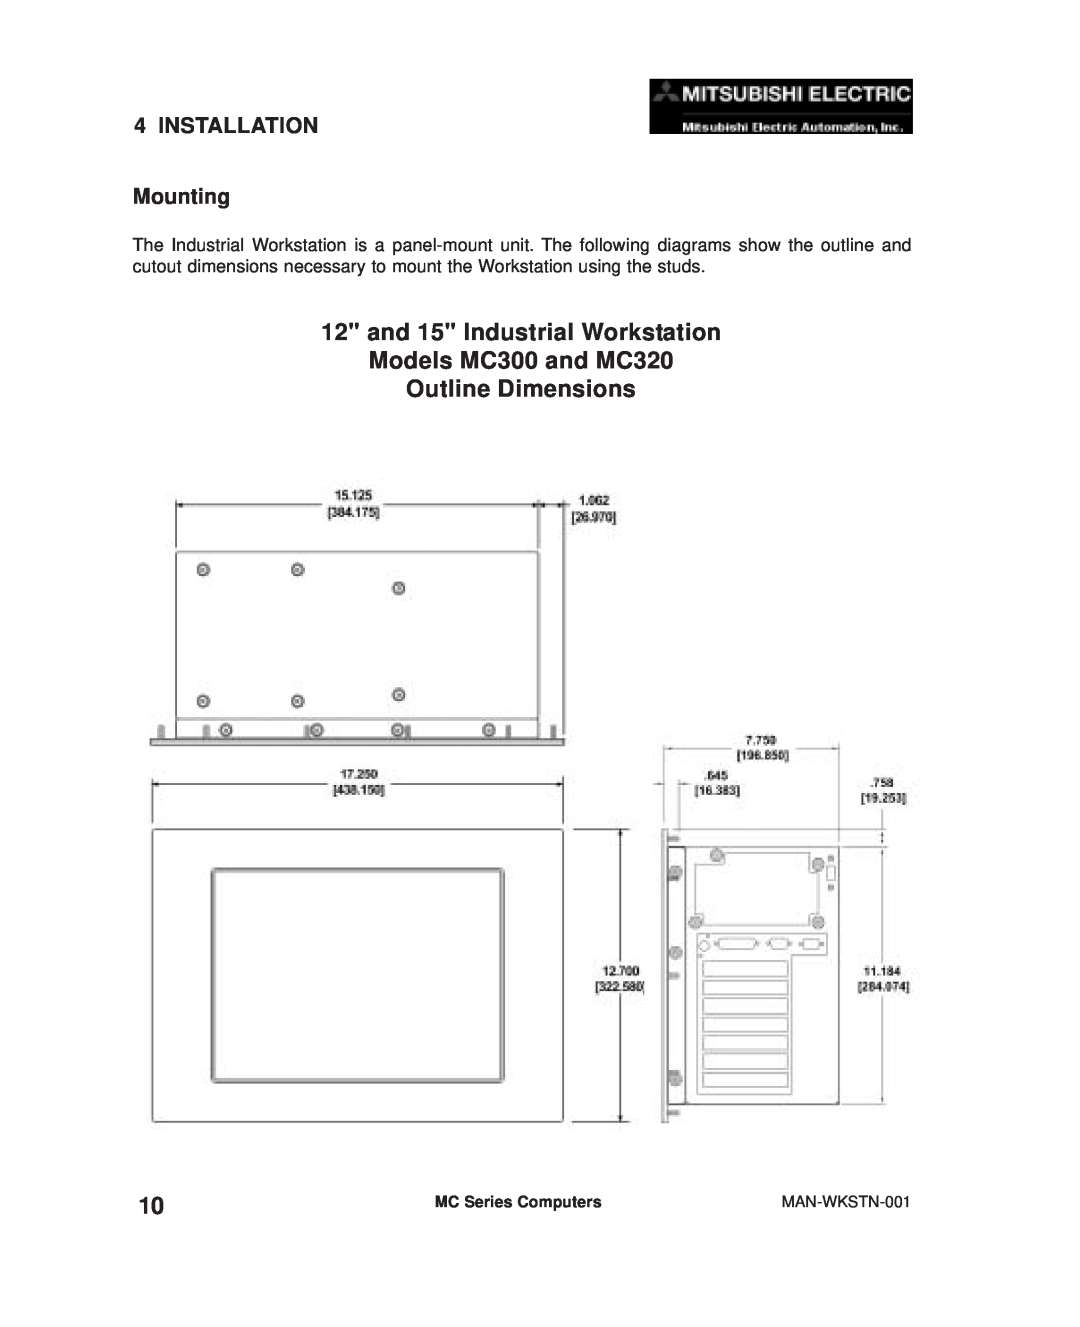 Mitsubishi Electronics and 15 Industrial Workstation Models MC300 and MC320, Outline Dimensions, INSTALLATION Mounting 